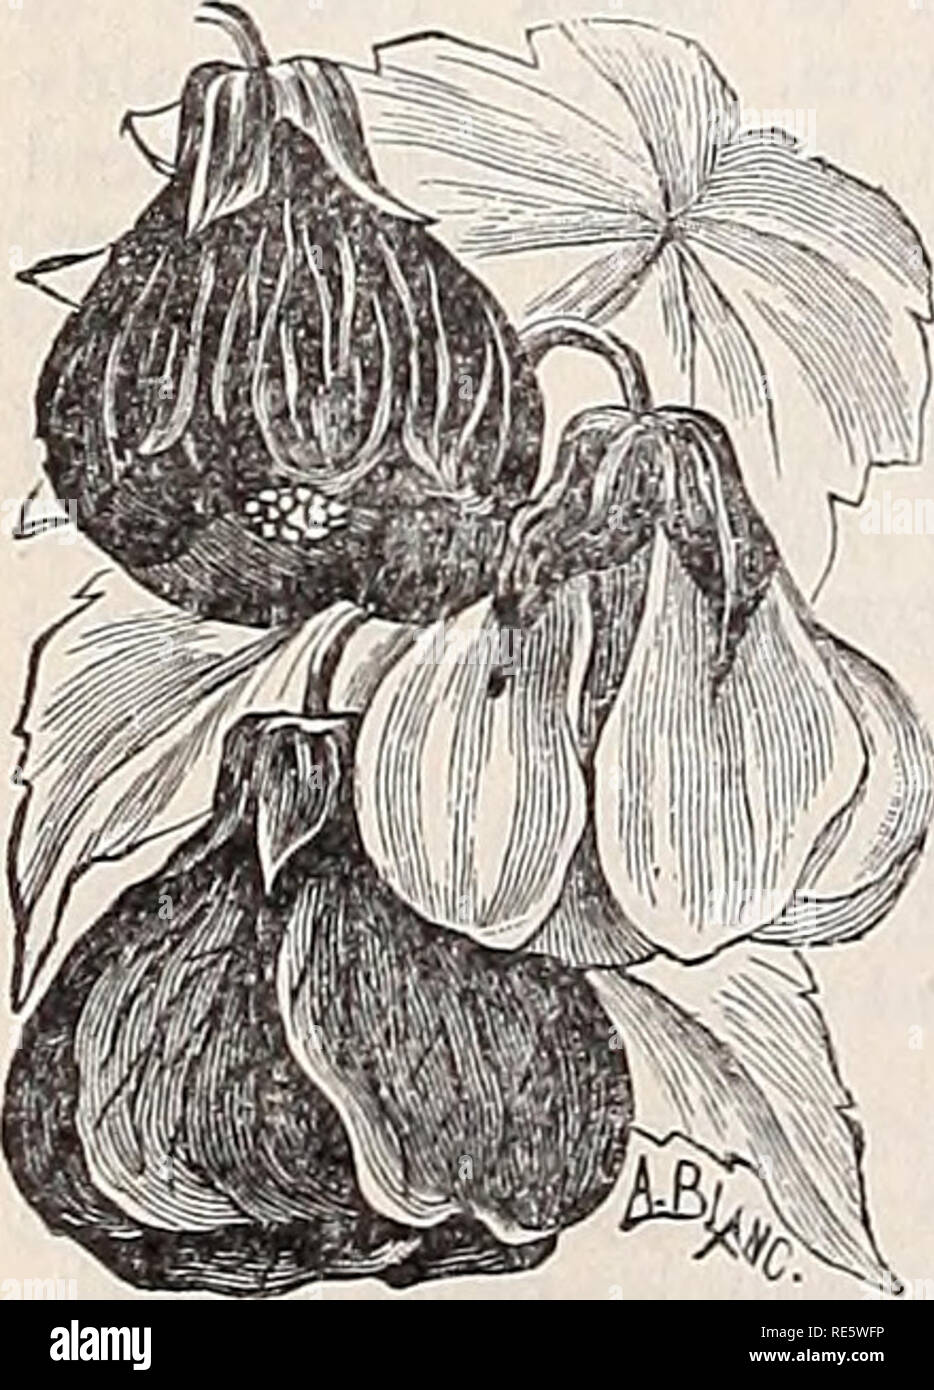 . Cox seed and plant co. catalogue. Seed industry and trade Catalogs; Seeds Catalogs; Flowers Seeds Catalogs; Fruit Seeds Catalogs; Plants, Ornamental Catalogs; Trees Catalogs. Populus alba (White Poplar)—A tree of wonder- fully rapid growth and wide-spreading habit. Leaves large, lobed and glossy-green above and white as snow beneath. Prefeis a moist soil, but flourishes anywhere. Oz., 25c; lb., $3.00. Salix alba (White Willow) — Lofty trees with handsome light-green foliage. Oz., 25c; lb., $2.50. Salisburia adtantifolia (Maiden Hair Tree) — A remarkable tree from Japan, combining in its foli Stock Photo